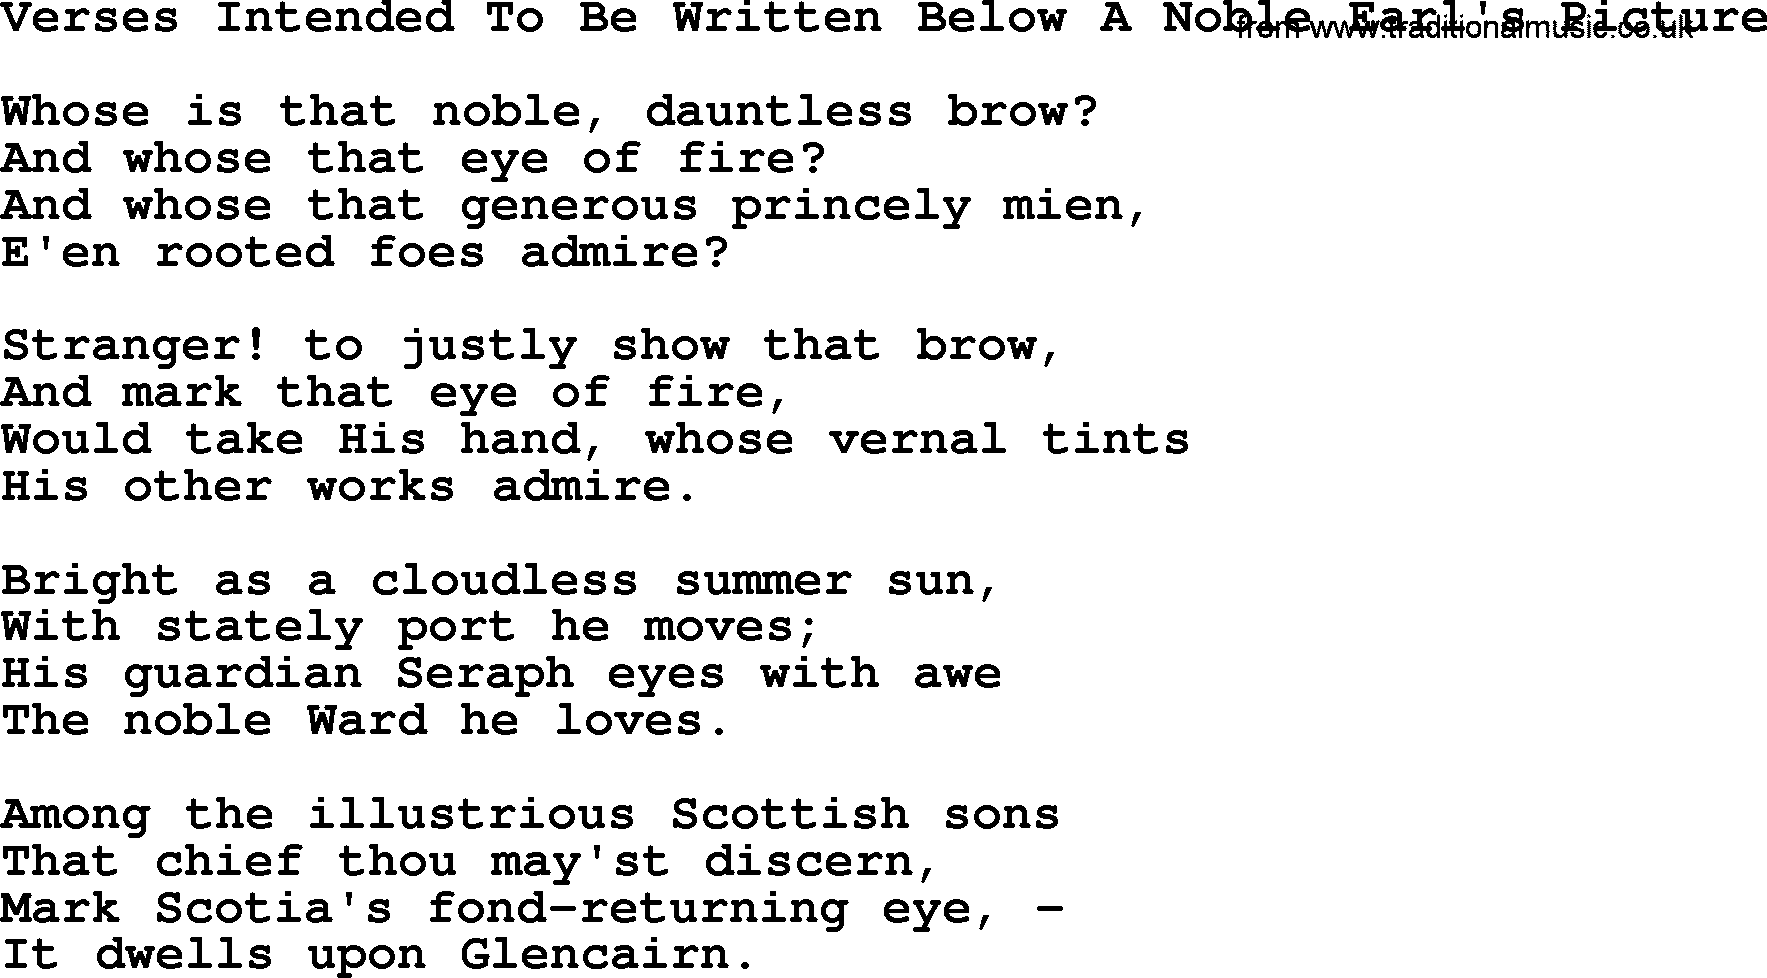 Robert Burns Songs & Lyrics: Verses Intended To Be Written Below A Noble Earl's Picture